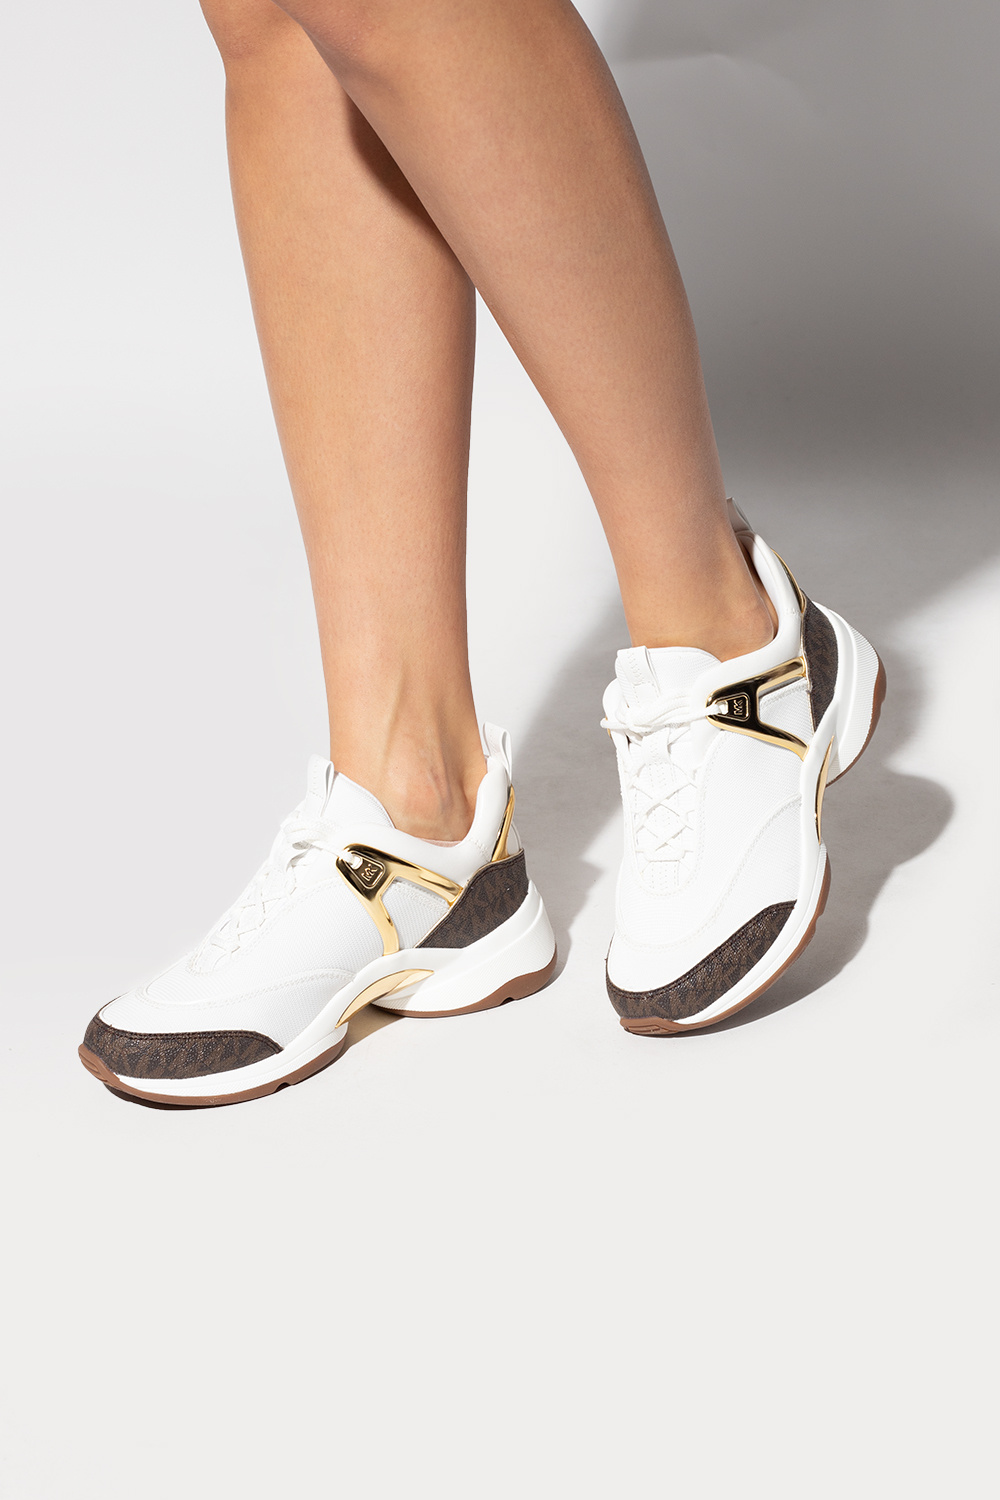 tilgivet Grund stamme Michael Michael Kors 'Sparks' sneakers | IetpShops | on iconic sneaker  silhouettes such as the | Women's Shoes